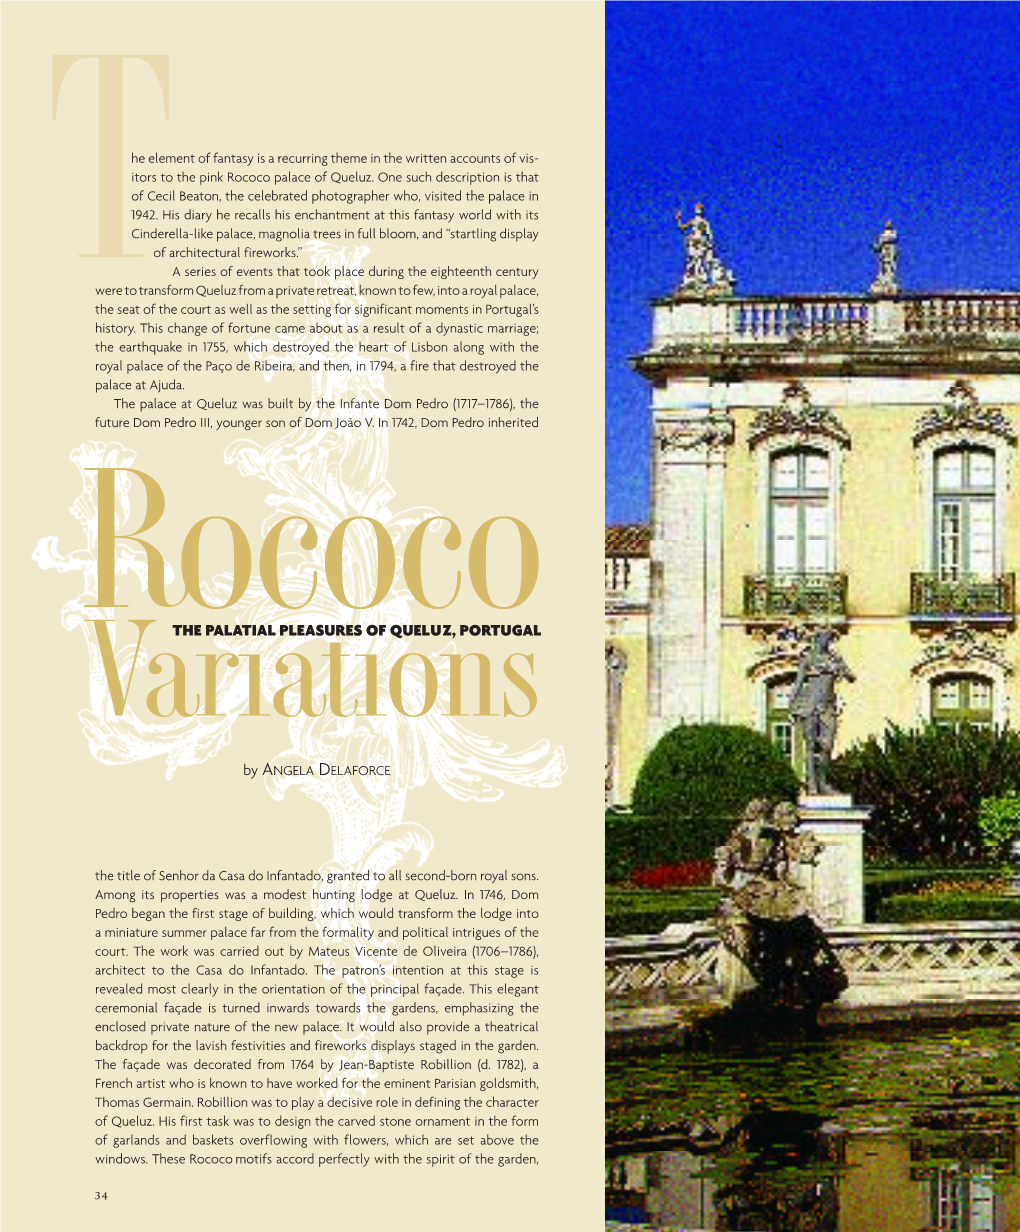 Itors to the Pink Rococo Palace of Queluz. One Such Description Is That of Cecil Beaton, the Celebrated Photographer Who, Visited the Palace in 1942